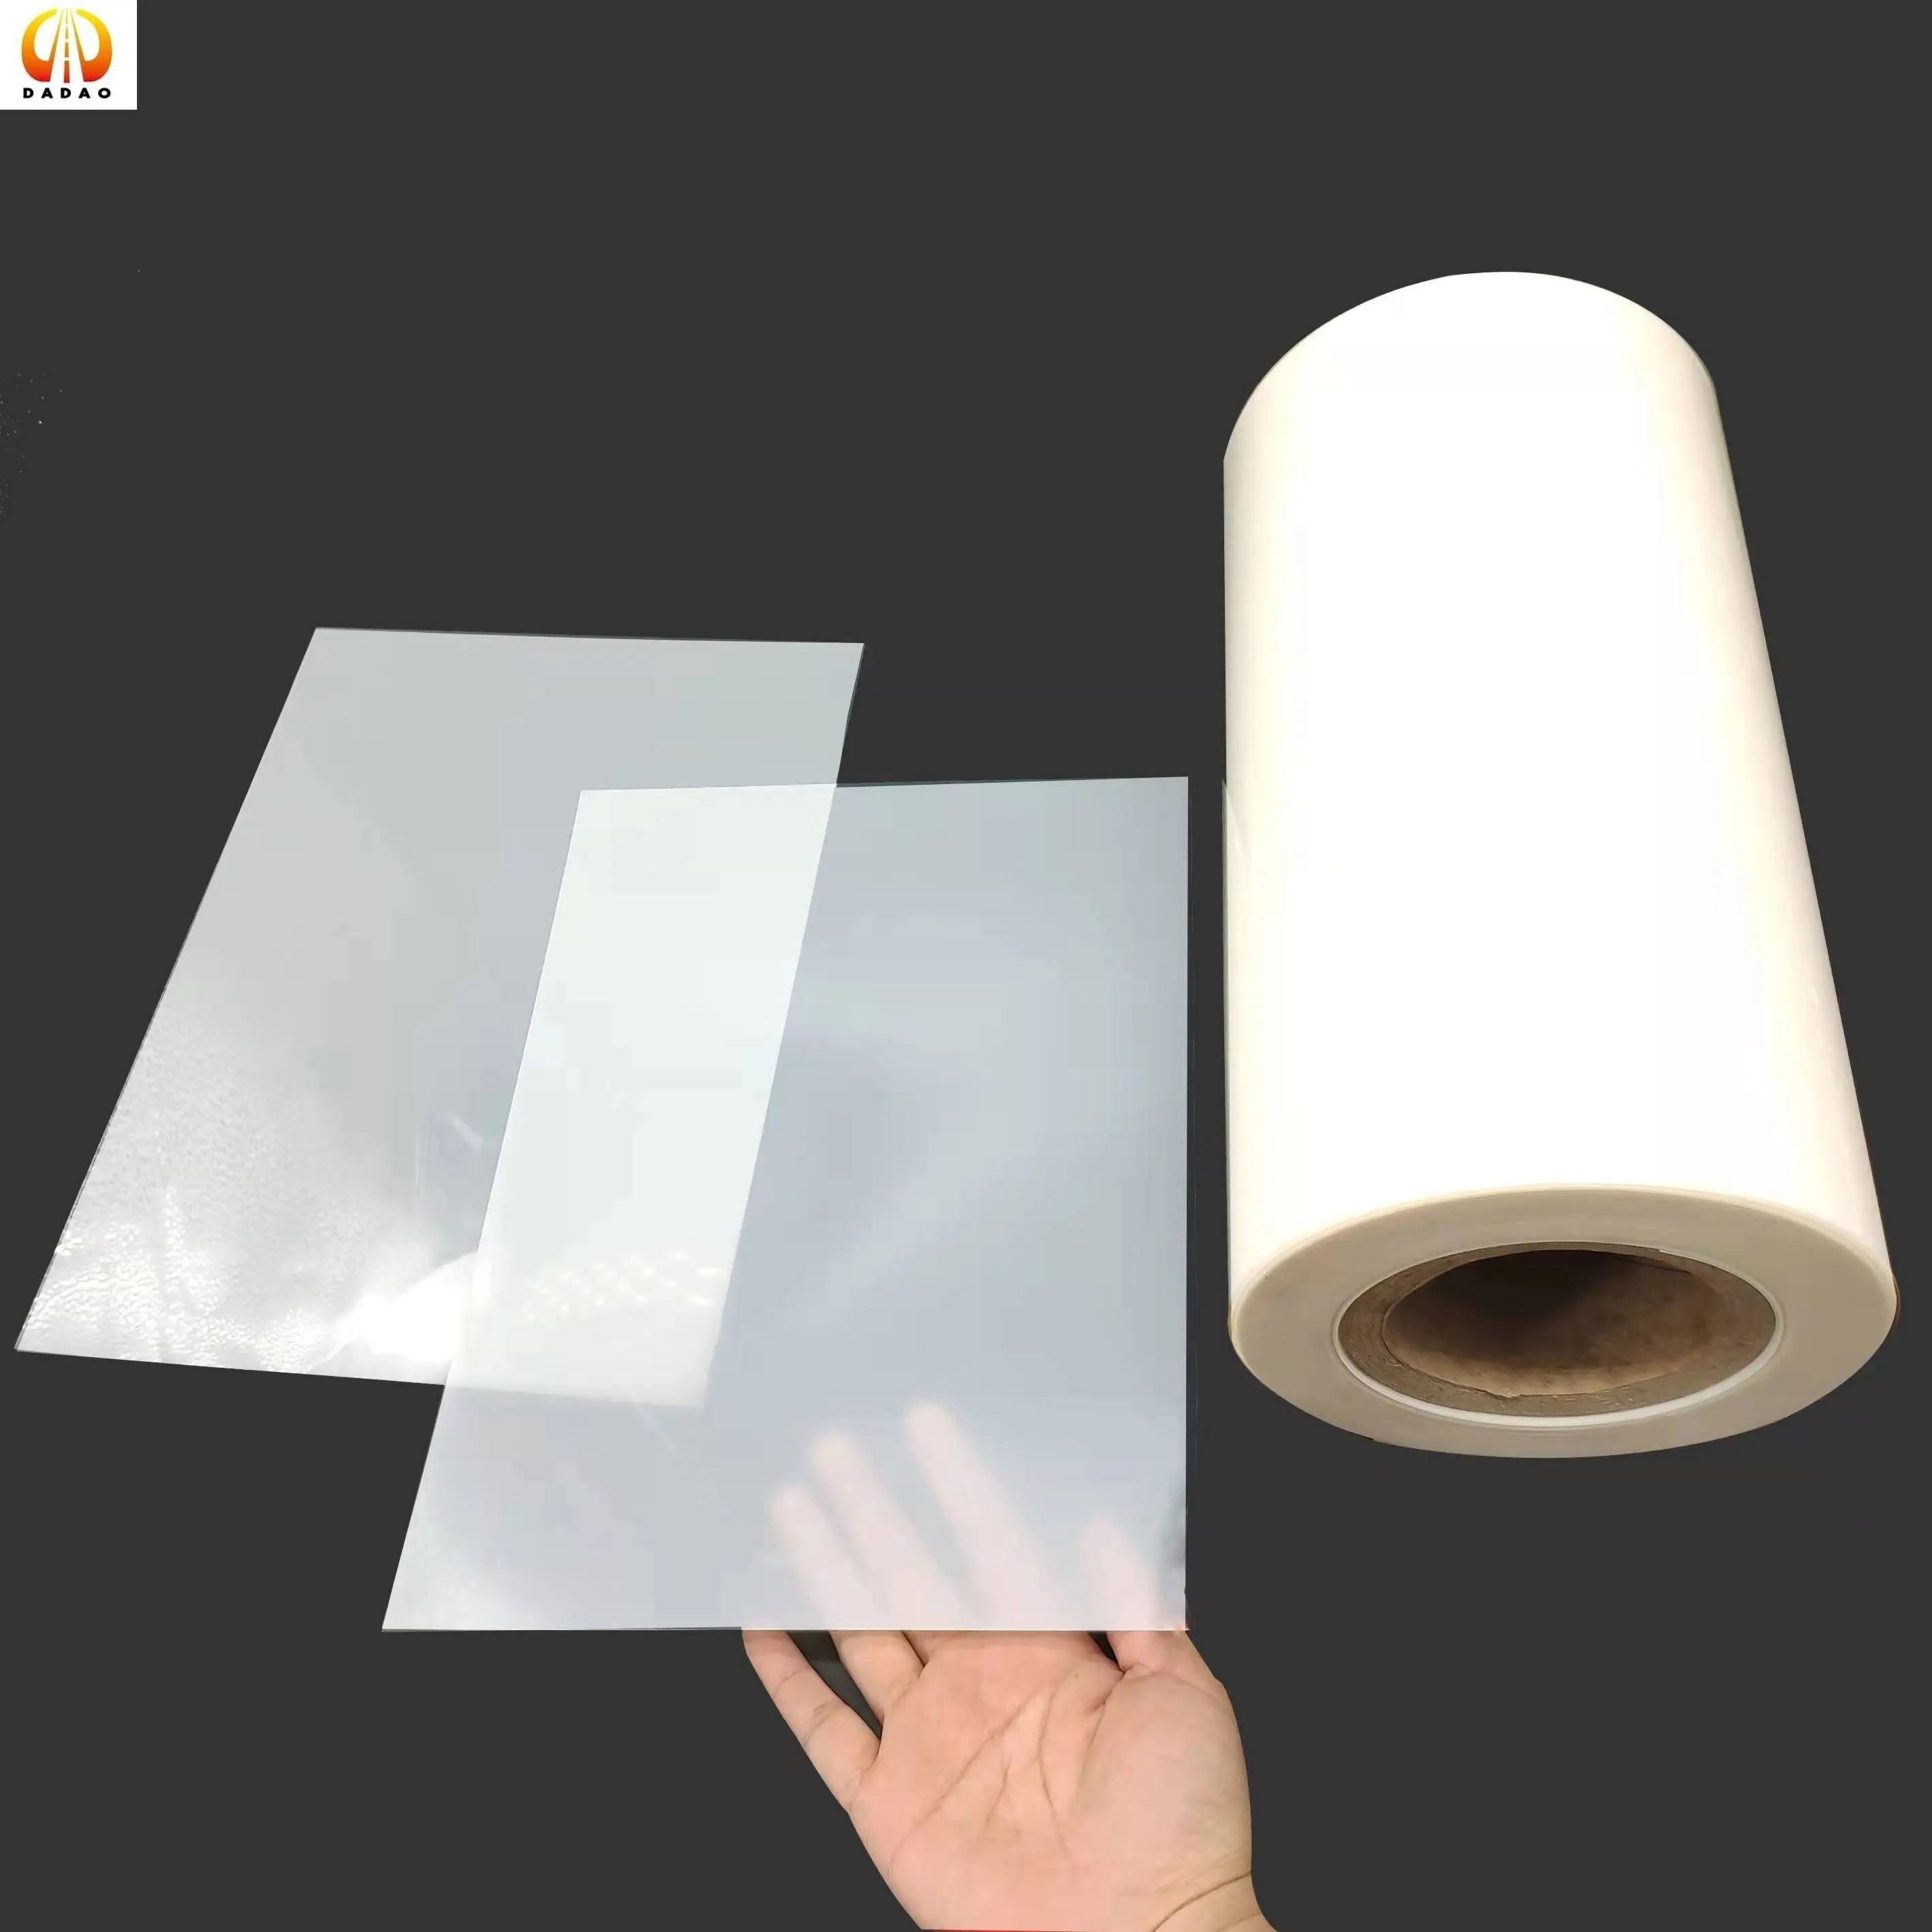 Reusable blank PET Stencil template film for laser cutting Painting on Wood, Fabric, Paper, Walls